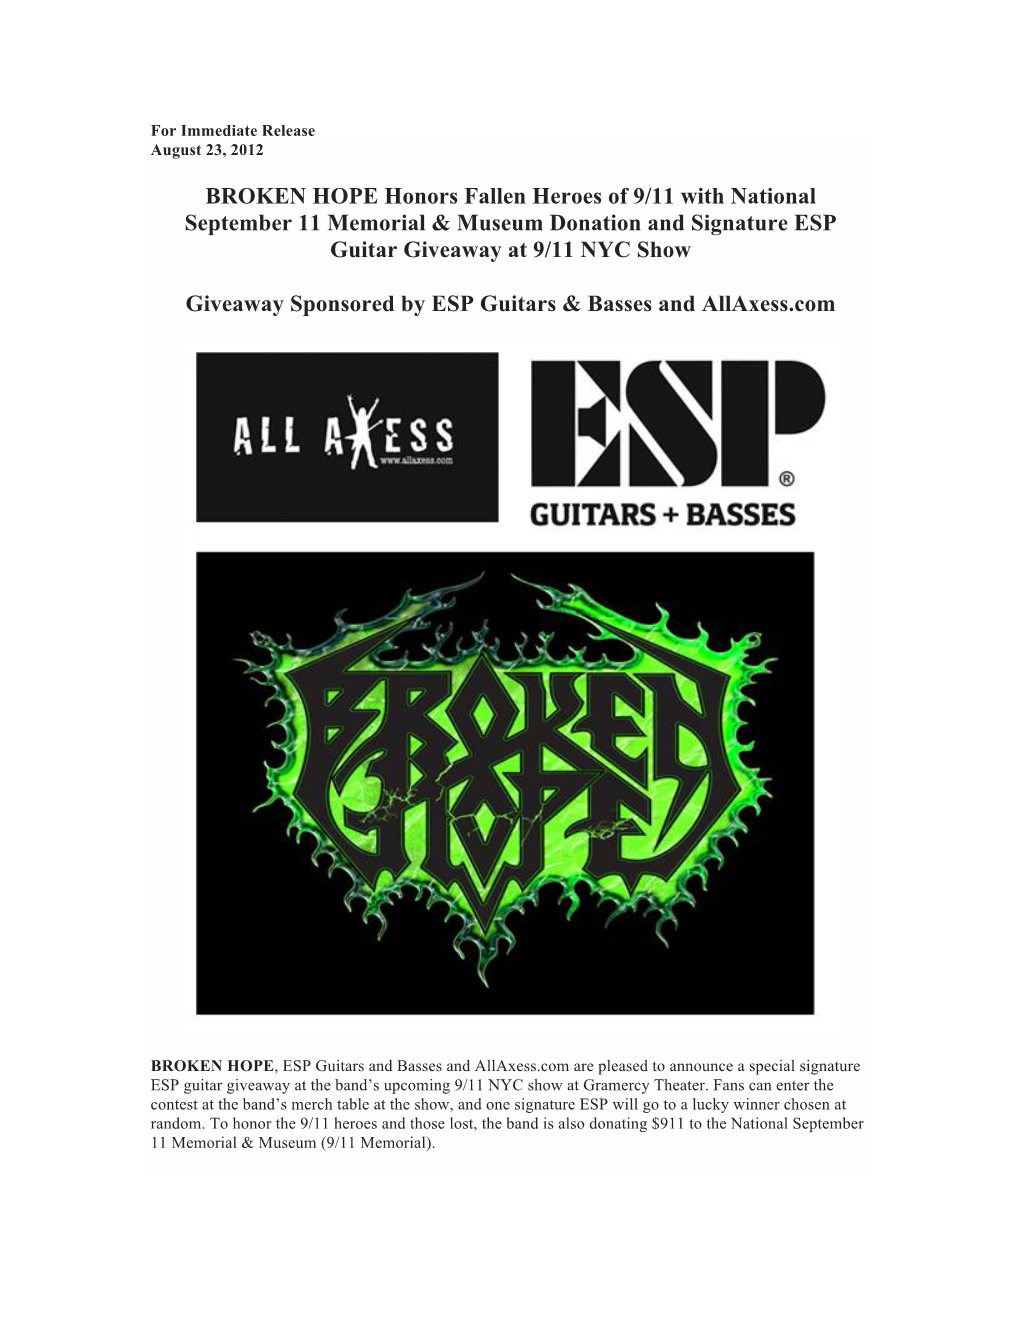 BROKEN HOPE Honors Fallen Heroes of 9/11 with National September 11 Memorial & Museum Donation and Signature ESP Guitar Giveaway at 9/11 NYC Show